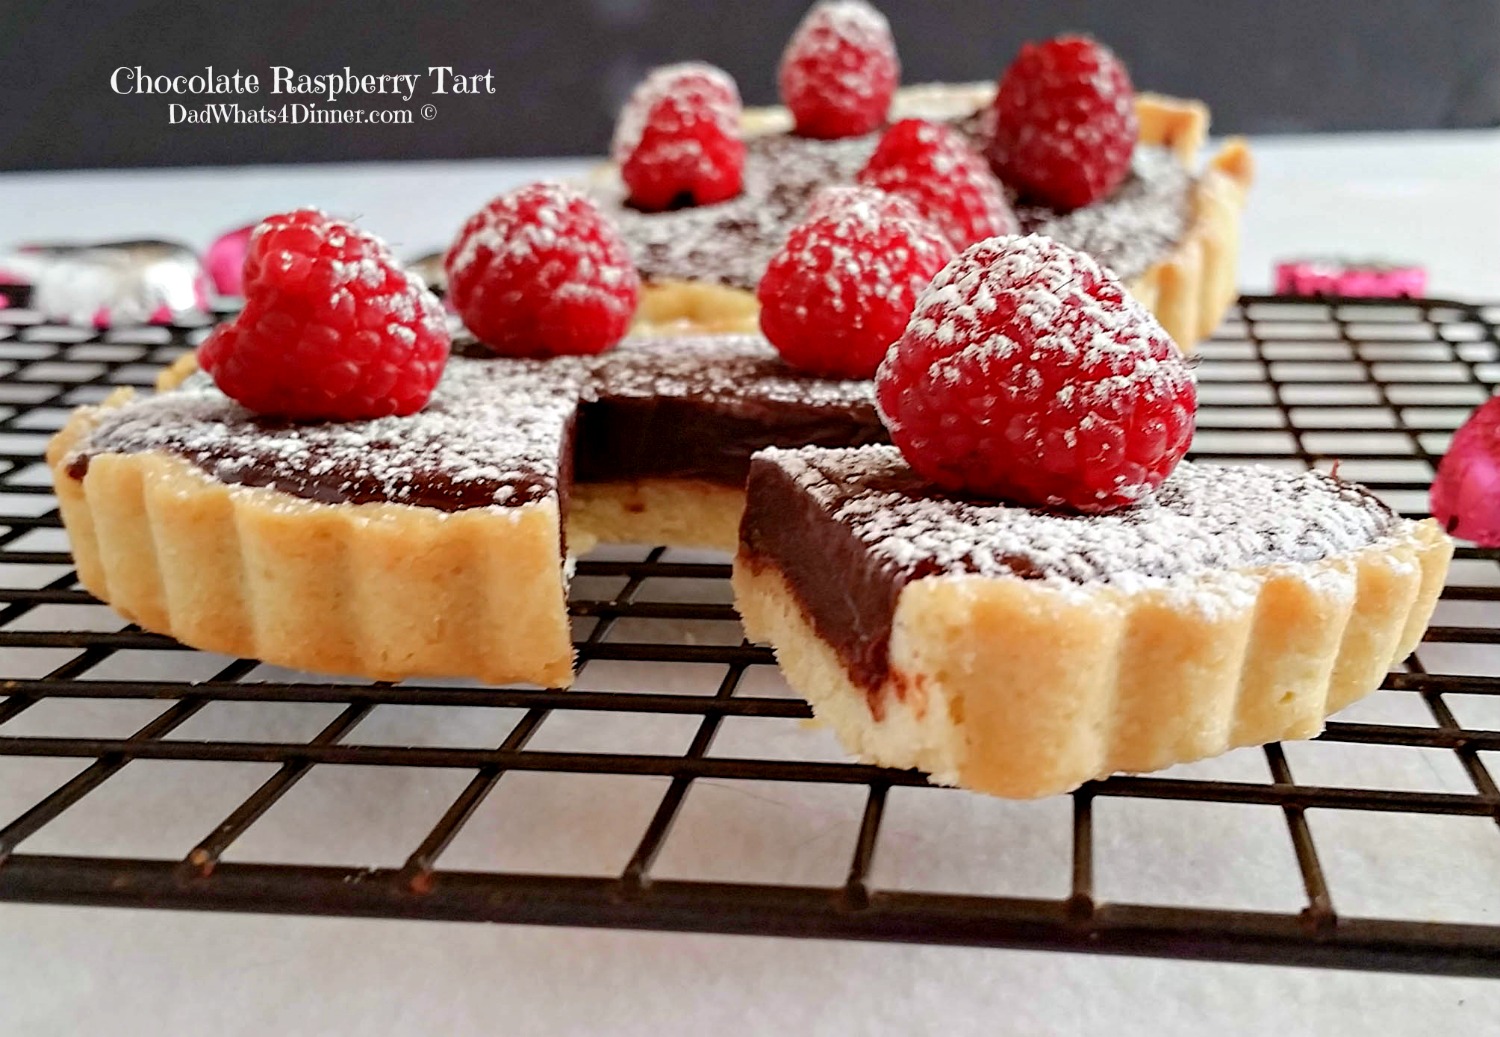 If you want to impress your significant other, make this Chocolate Raspberry Tart. The ultimate Valentine's Day dessert!| http://dadwhats4dinner.com